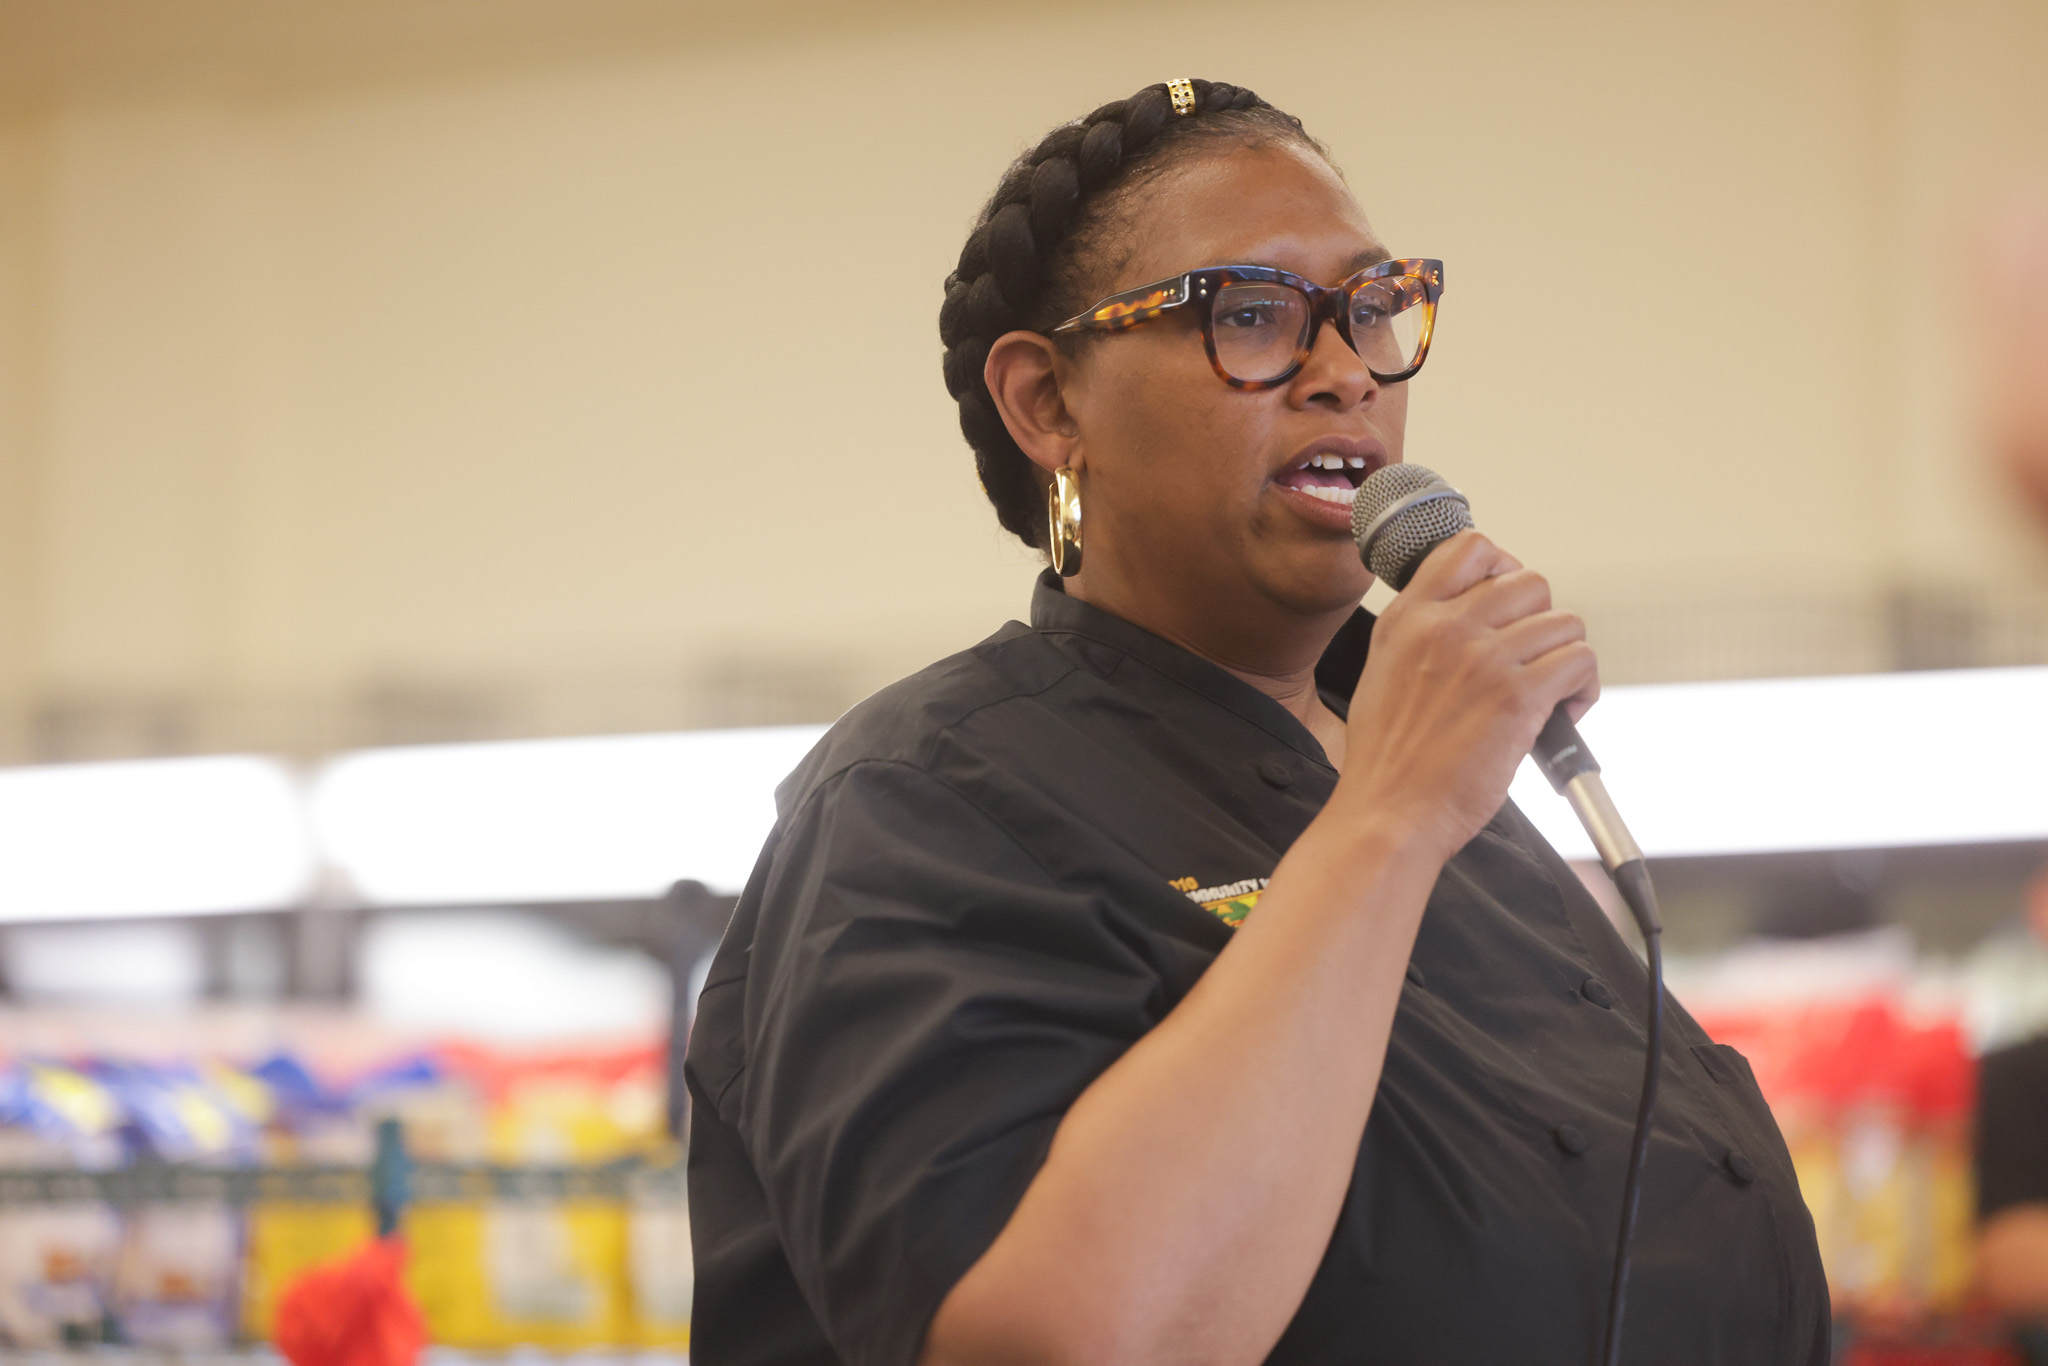 A person with short, braided hair and large, round glasses is speaking into a microphone. They are wearing a dark button-up shirt, possibly a uniform, in a brightly lit indoor space.